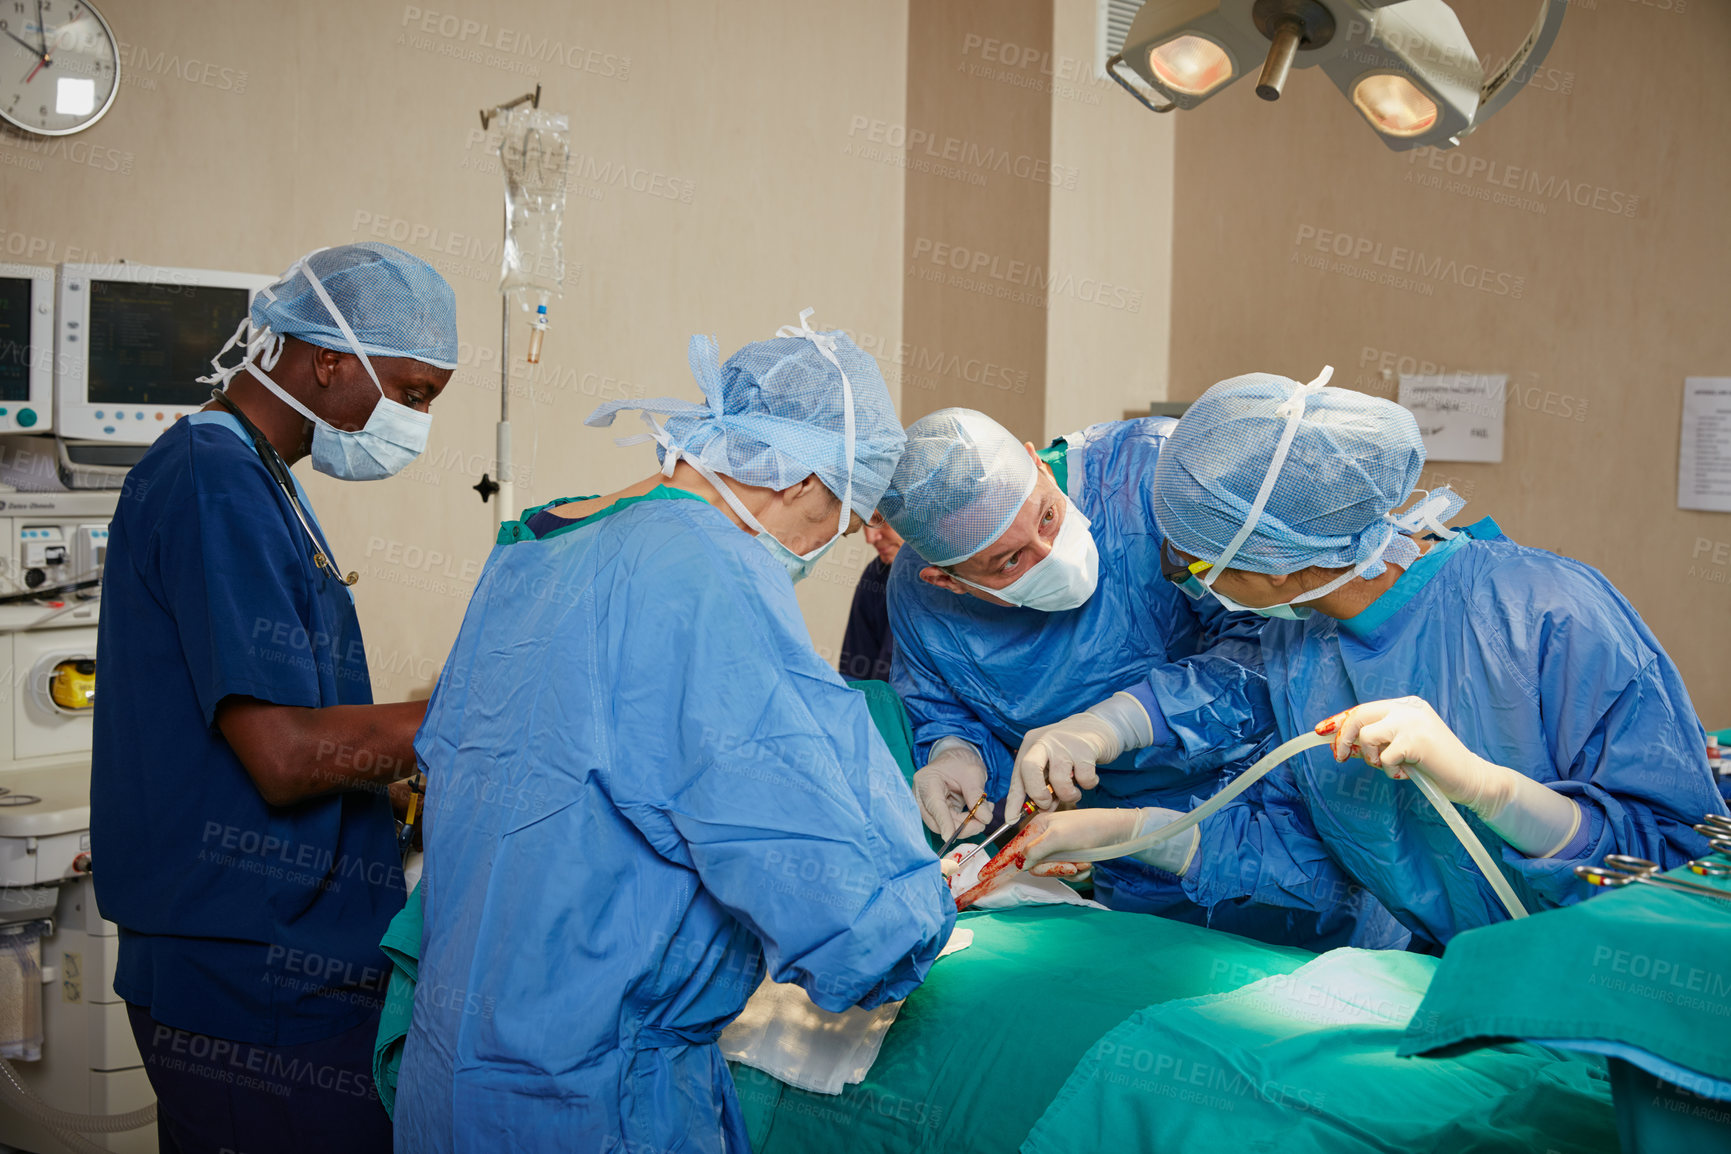 Buy stock photo Shot of a team of surgeons performing a surgery in an operating room